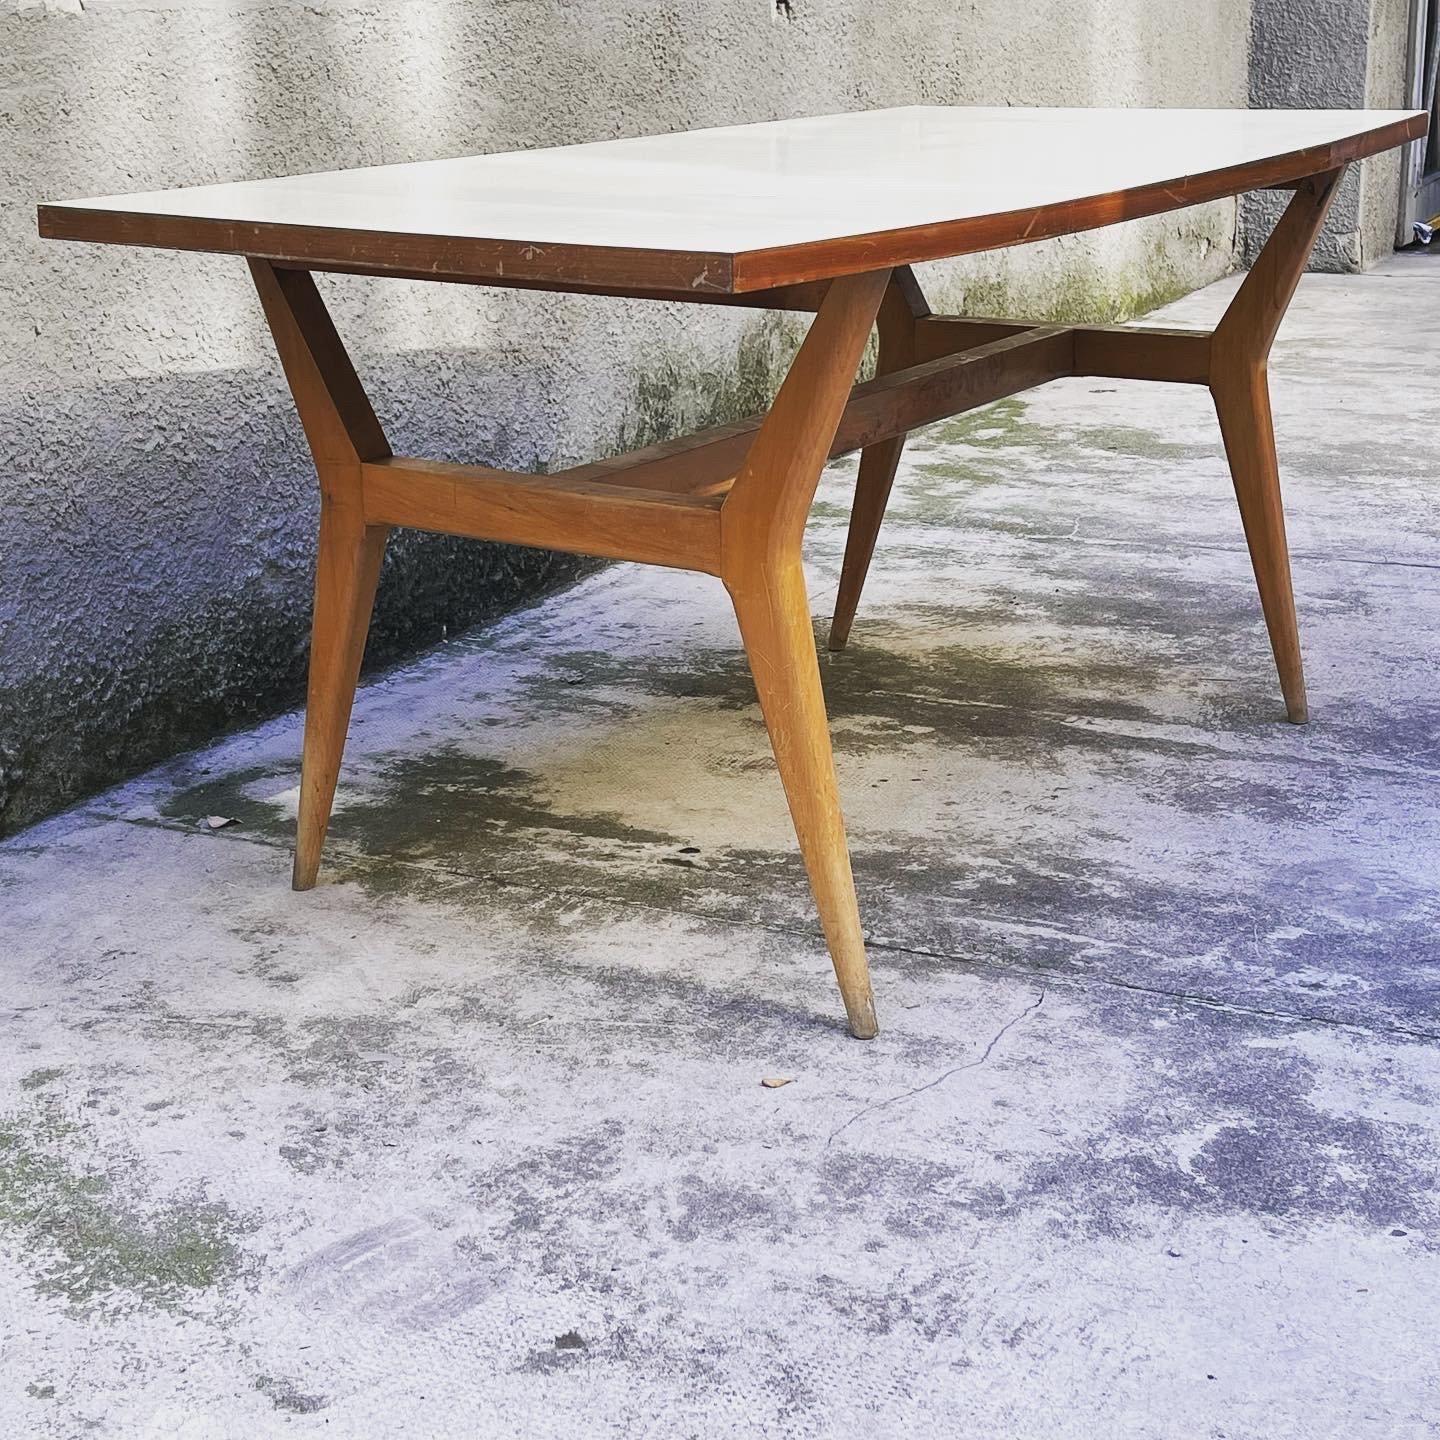 
Beautiful wooden dining table made in Italy in 1950. The wooden dining table has a nice rectangular top, the legs are slightly curved outwards. The top of the dining table is covered with a light laminate in a classic and typical style of the time,